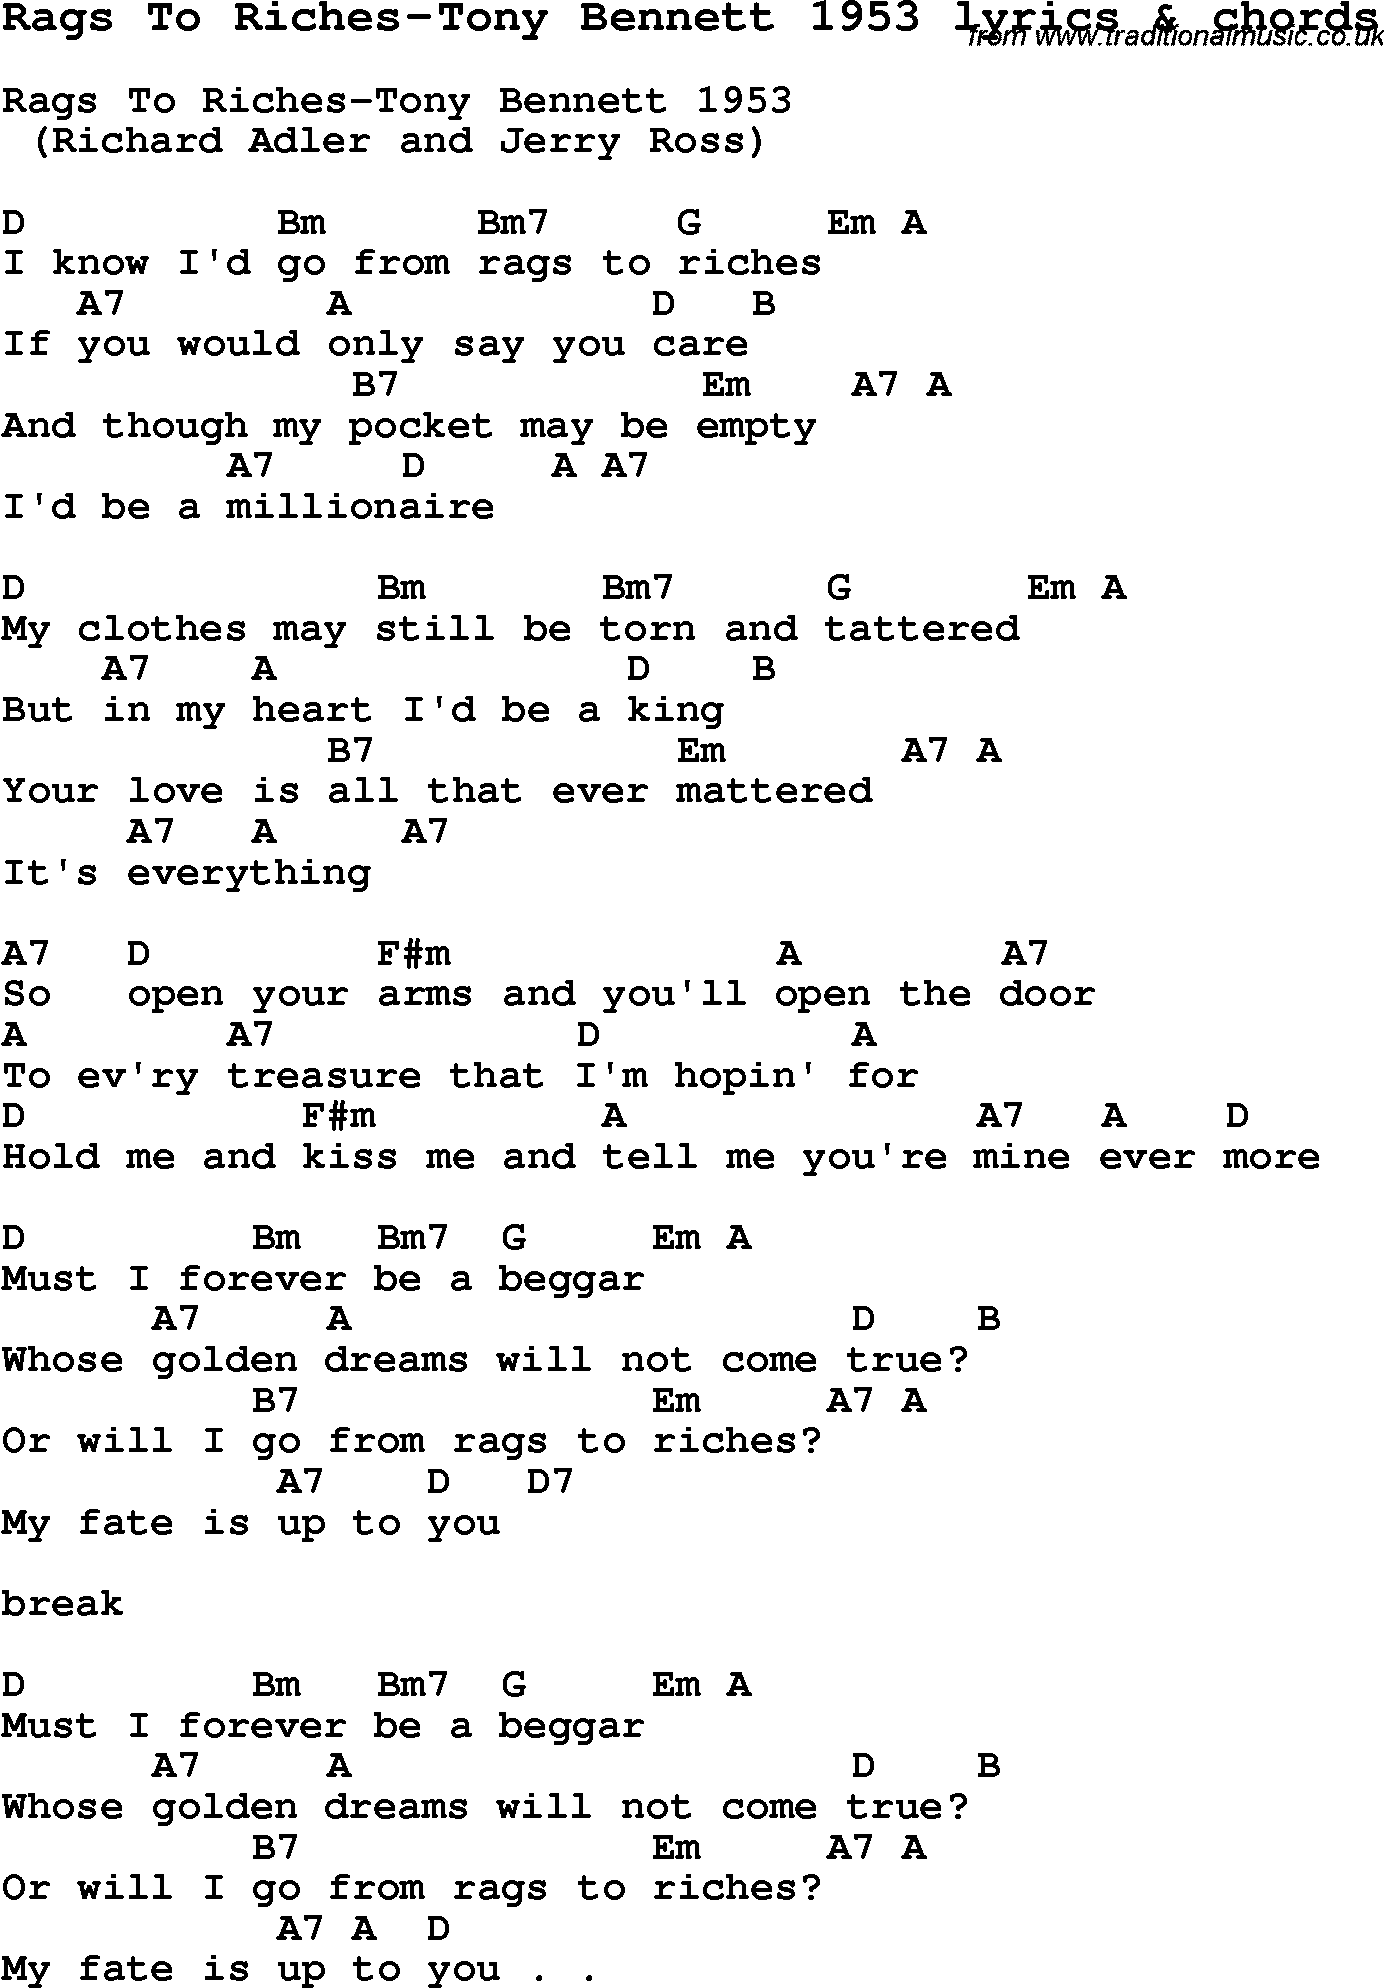 Love Song Lyrics for: Rags To Riches-Tony Bennett 1953 with chords for Ukulele, Guitar Banjo etc.